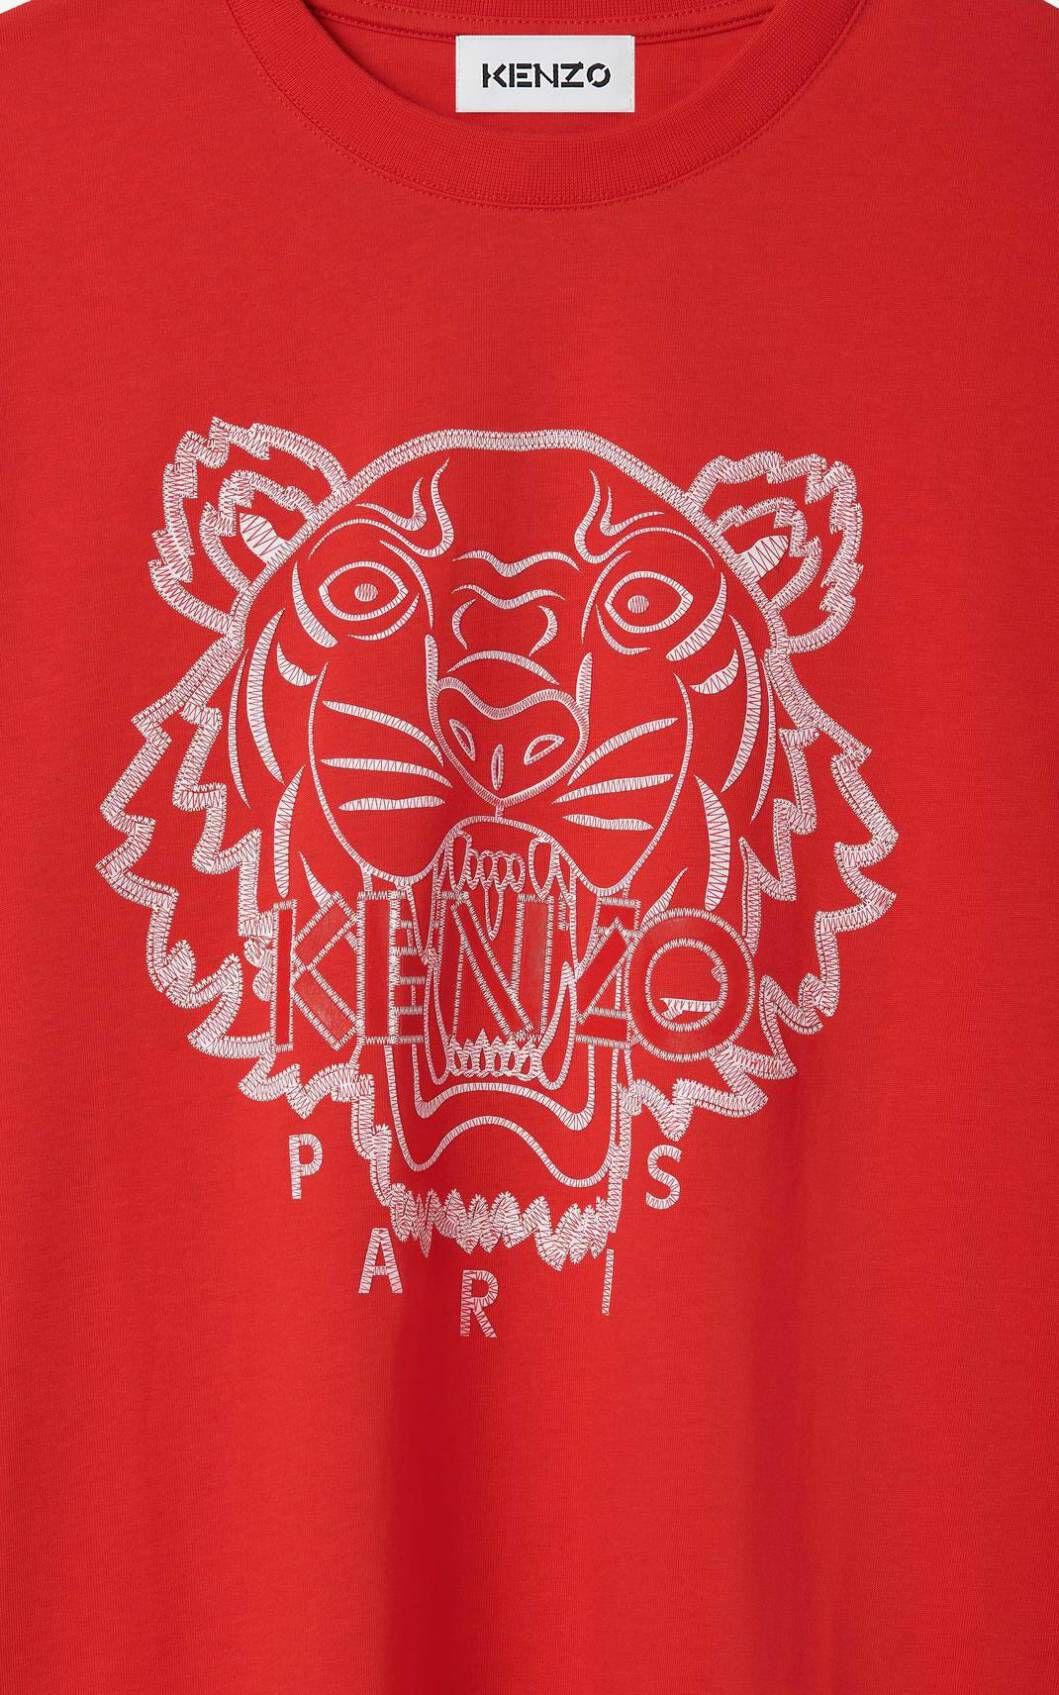 KENZO Cotton Tiger T-shirt in Red for Men - Lyst